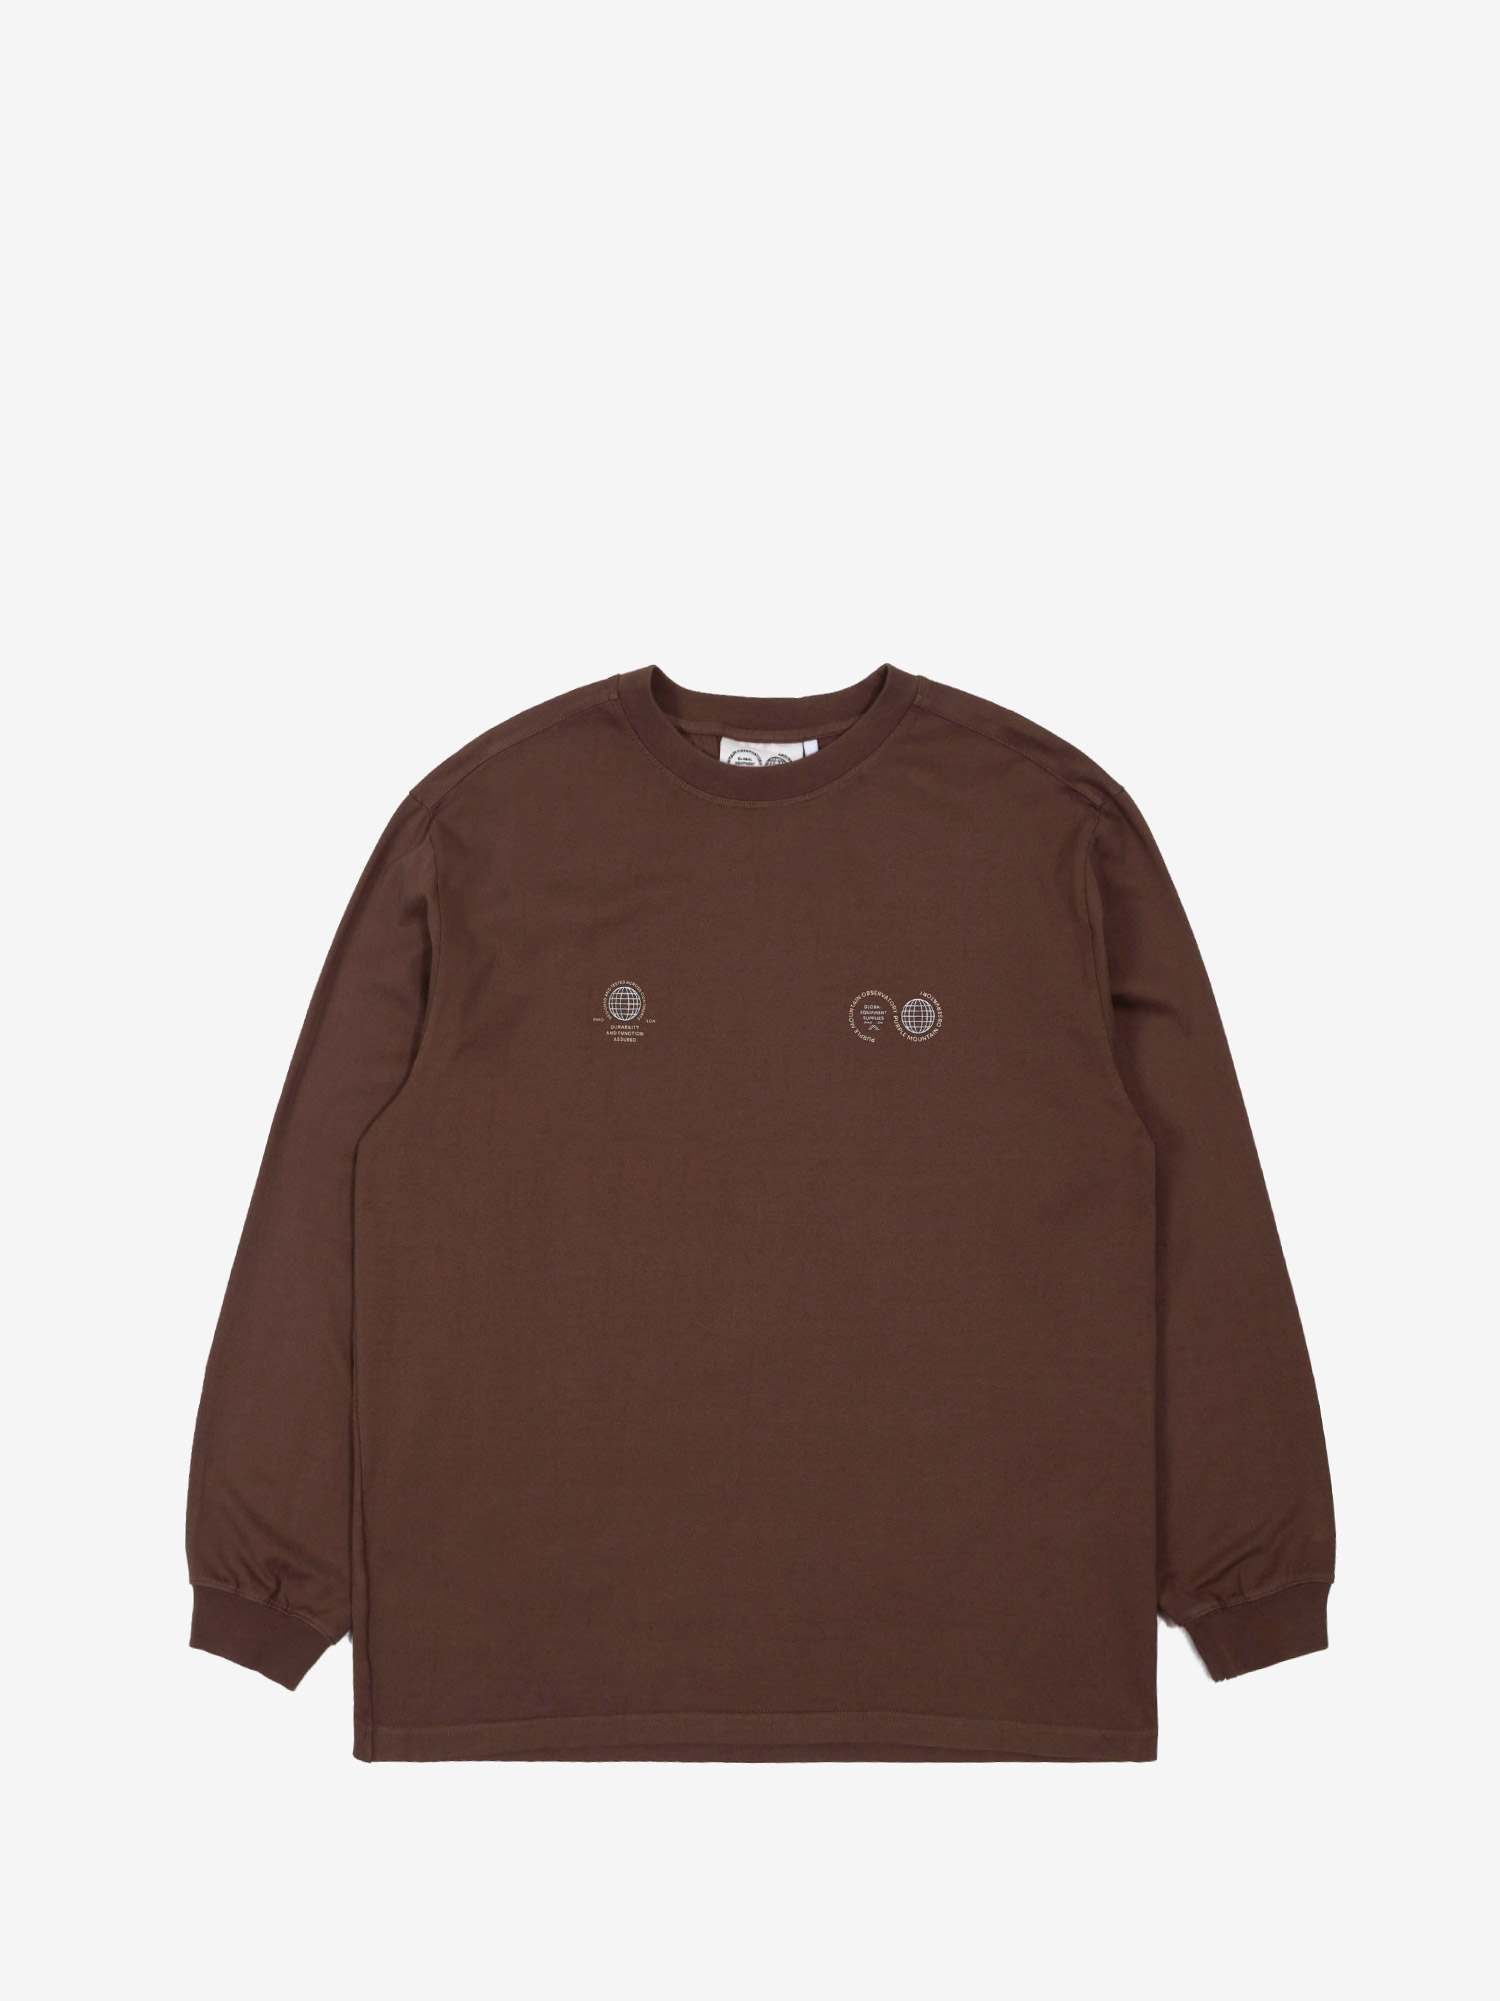 Featured image for “GLOBE LOGO LONG SLEEVE T-SHIRT CHOCOLATE”